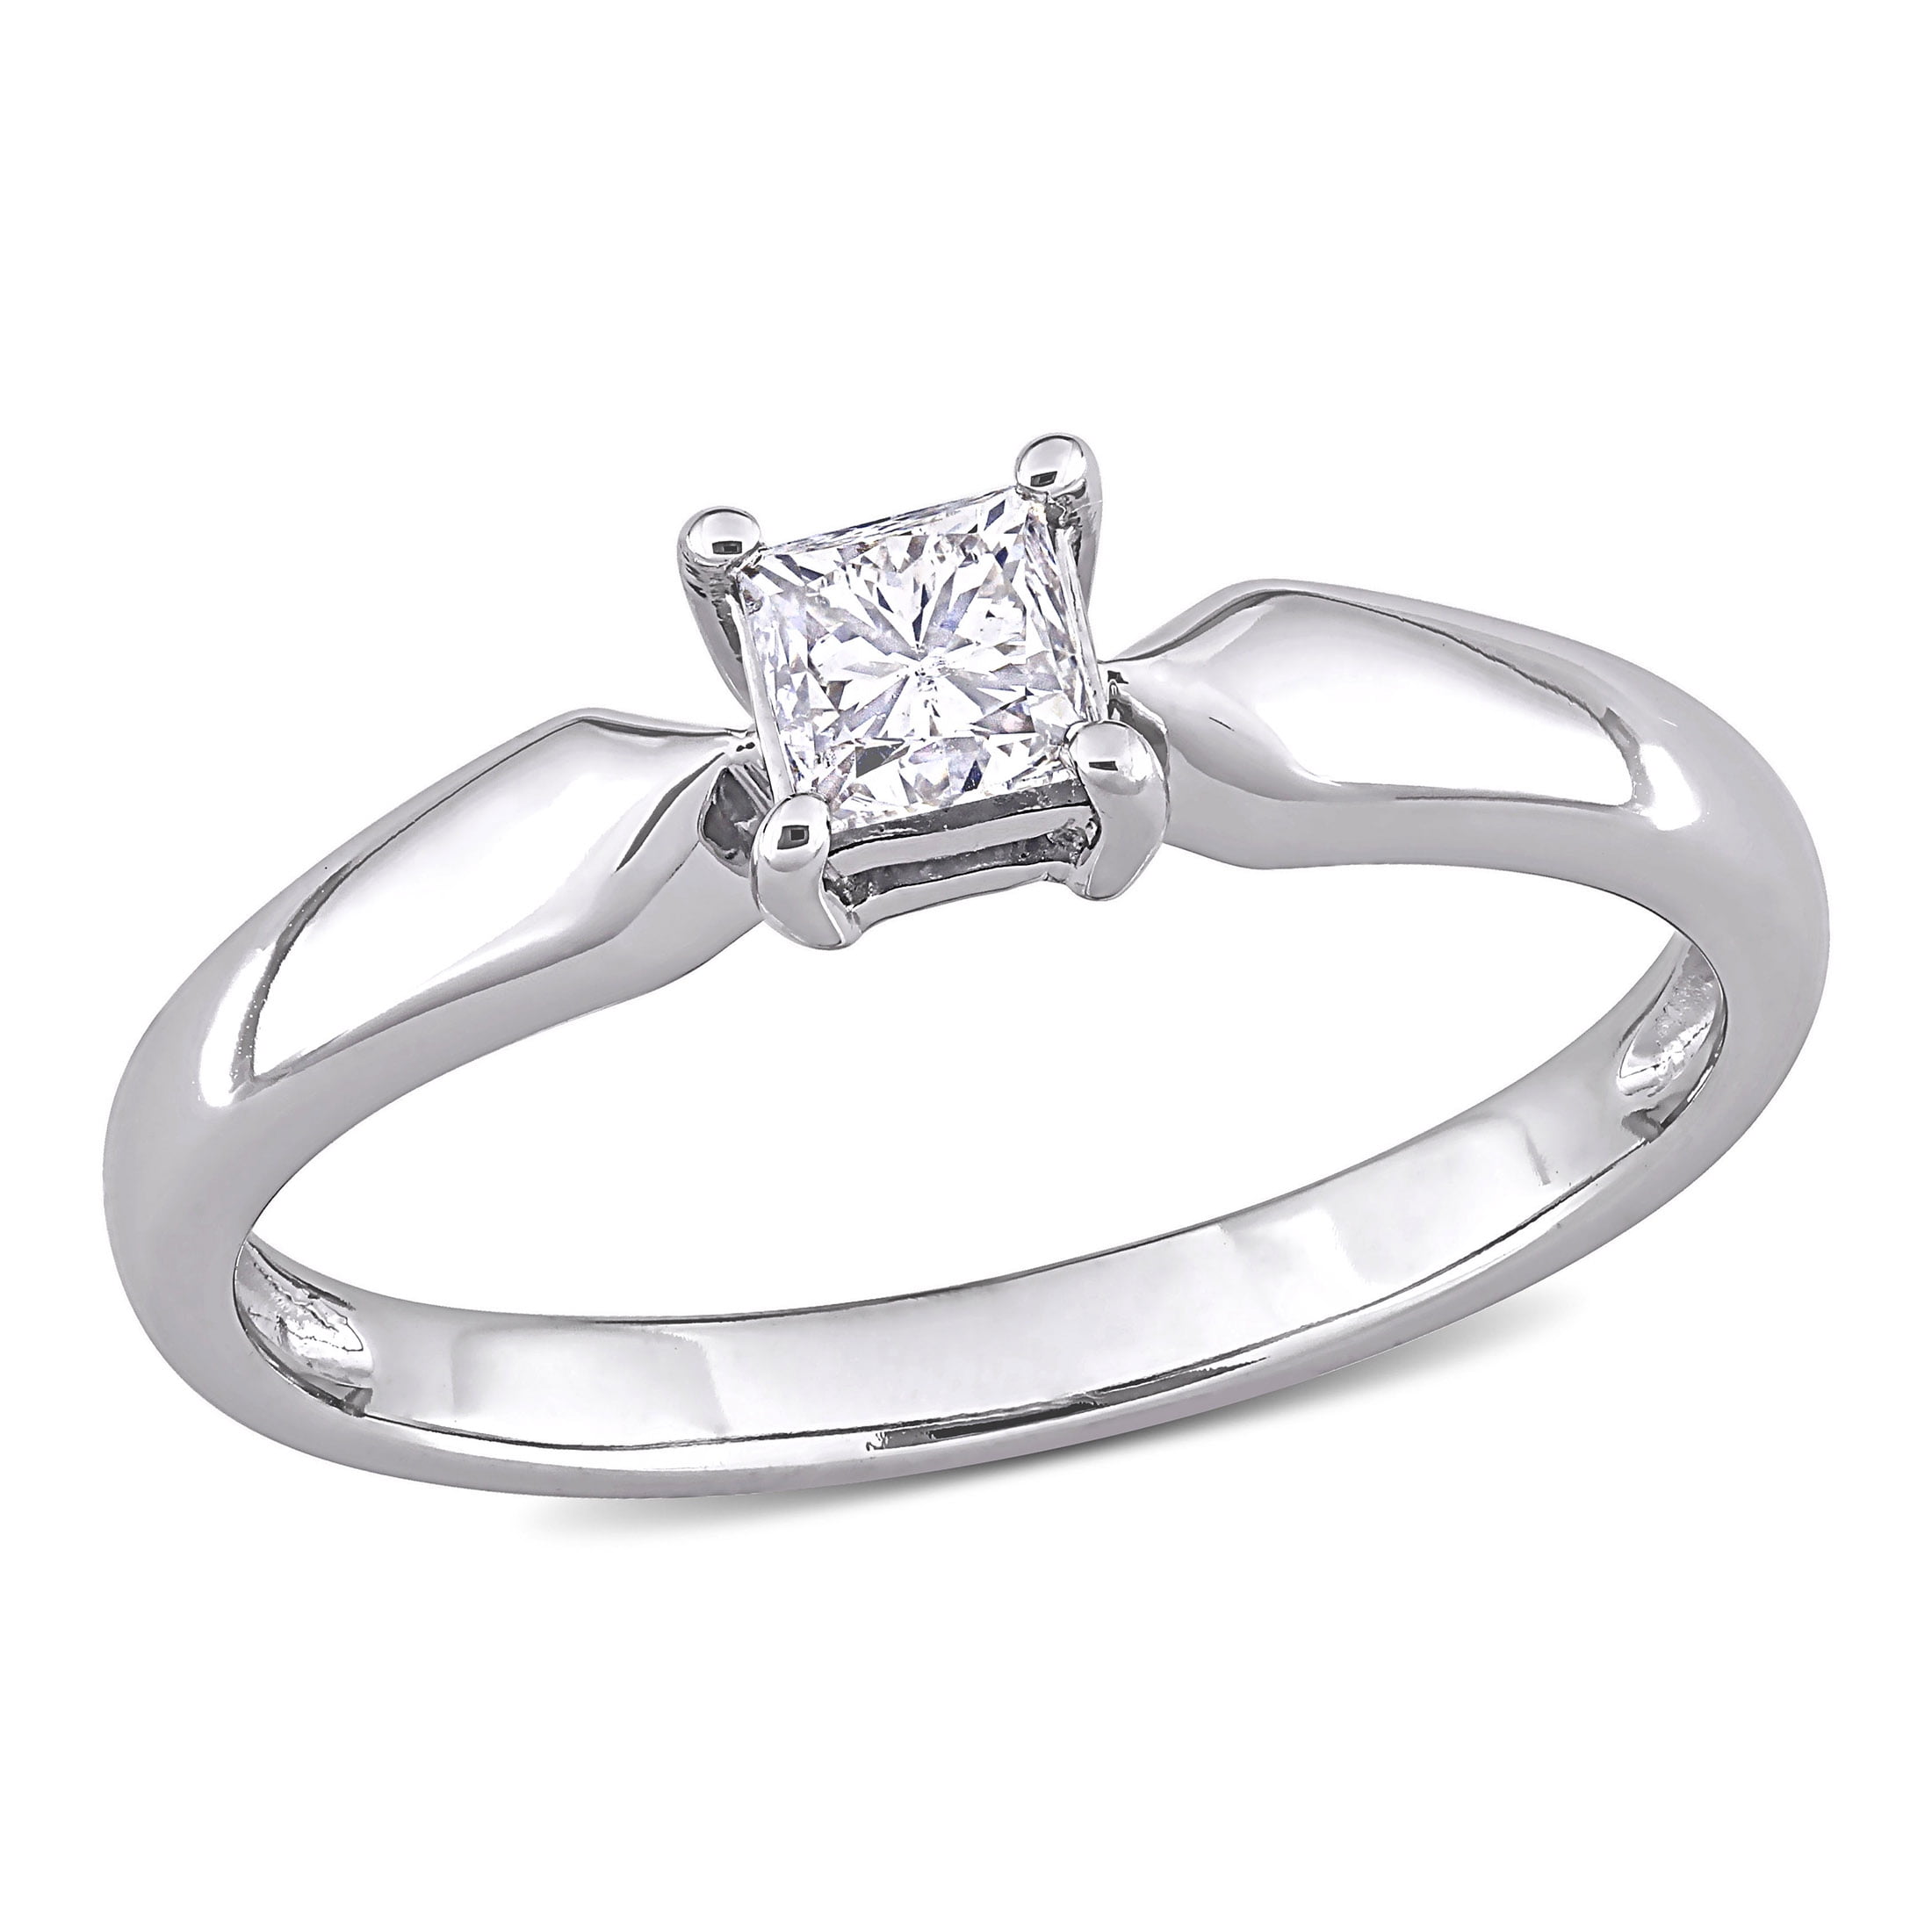 Engagement Wedding Solitaire Bypass Ring 2.1 Ct Princess Diamond 14K White Gold 